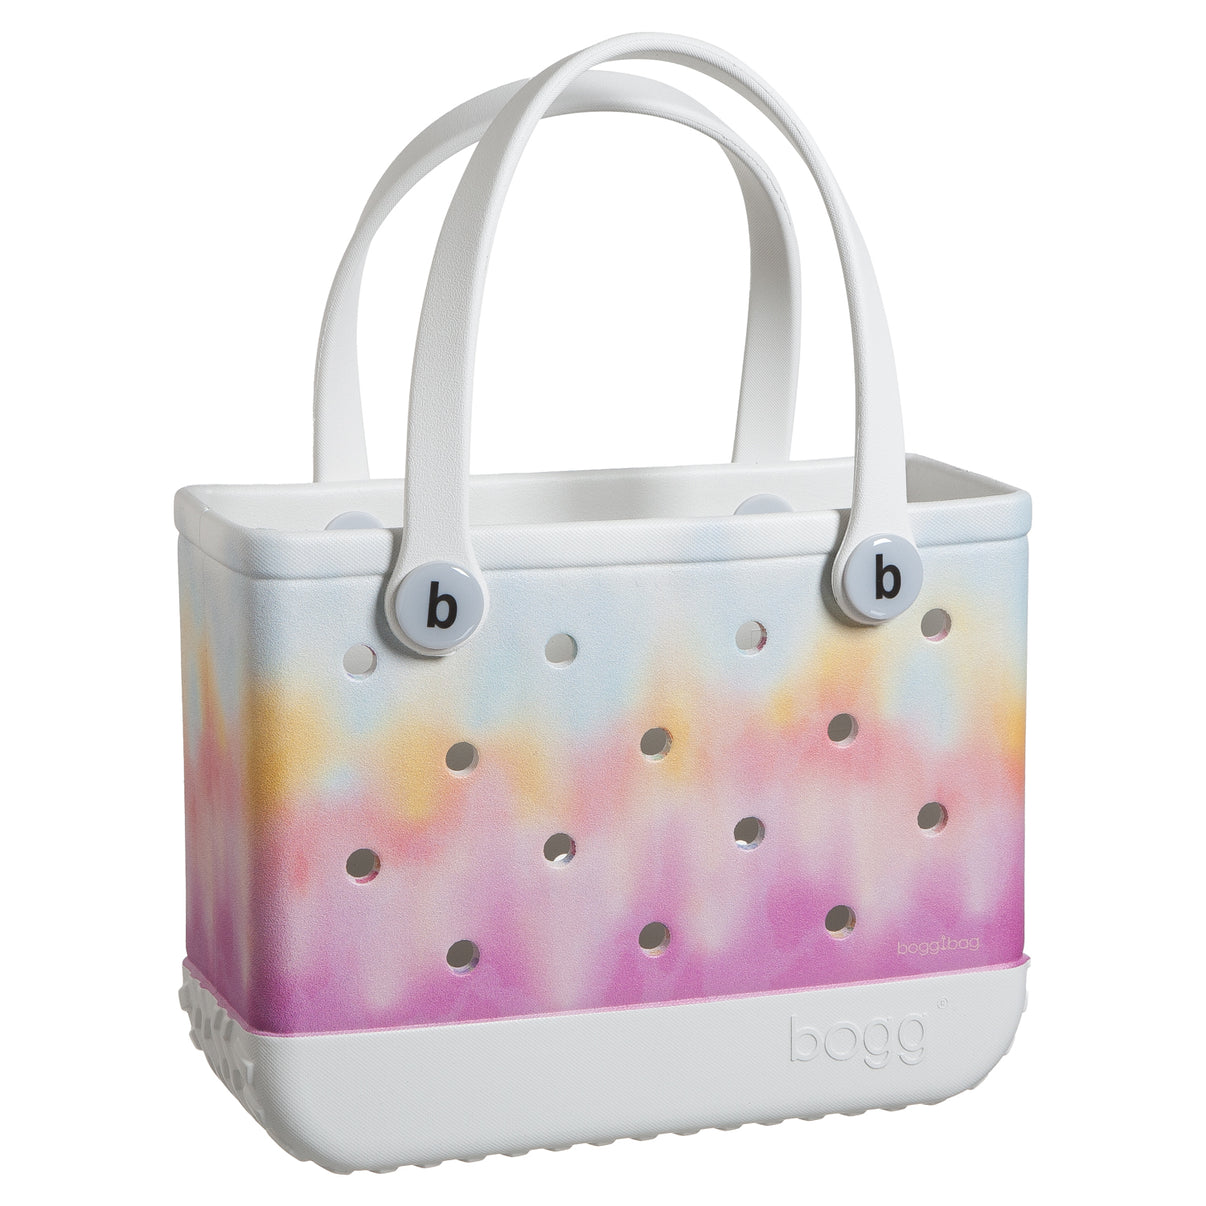 Bitty Bogg Bag | Cotton Candy